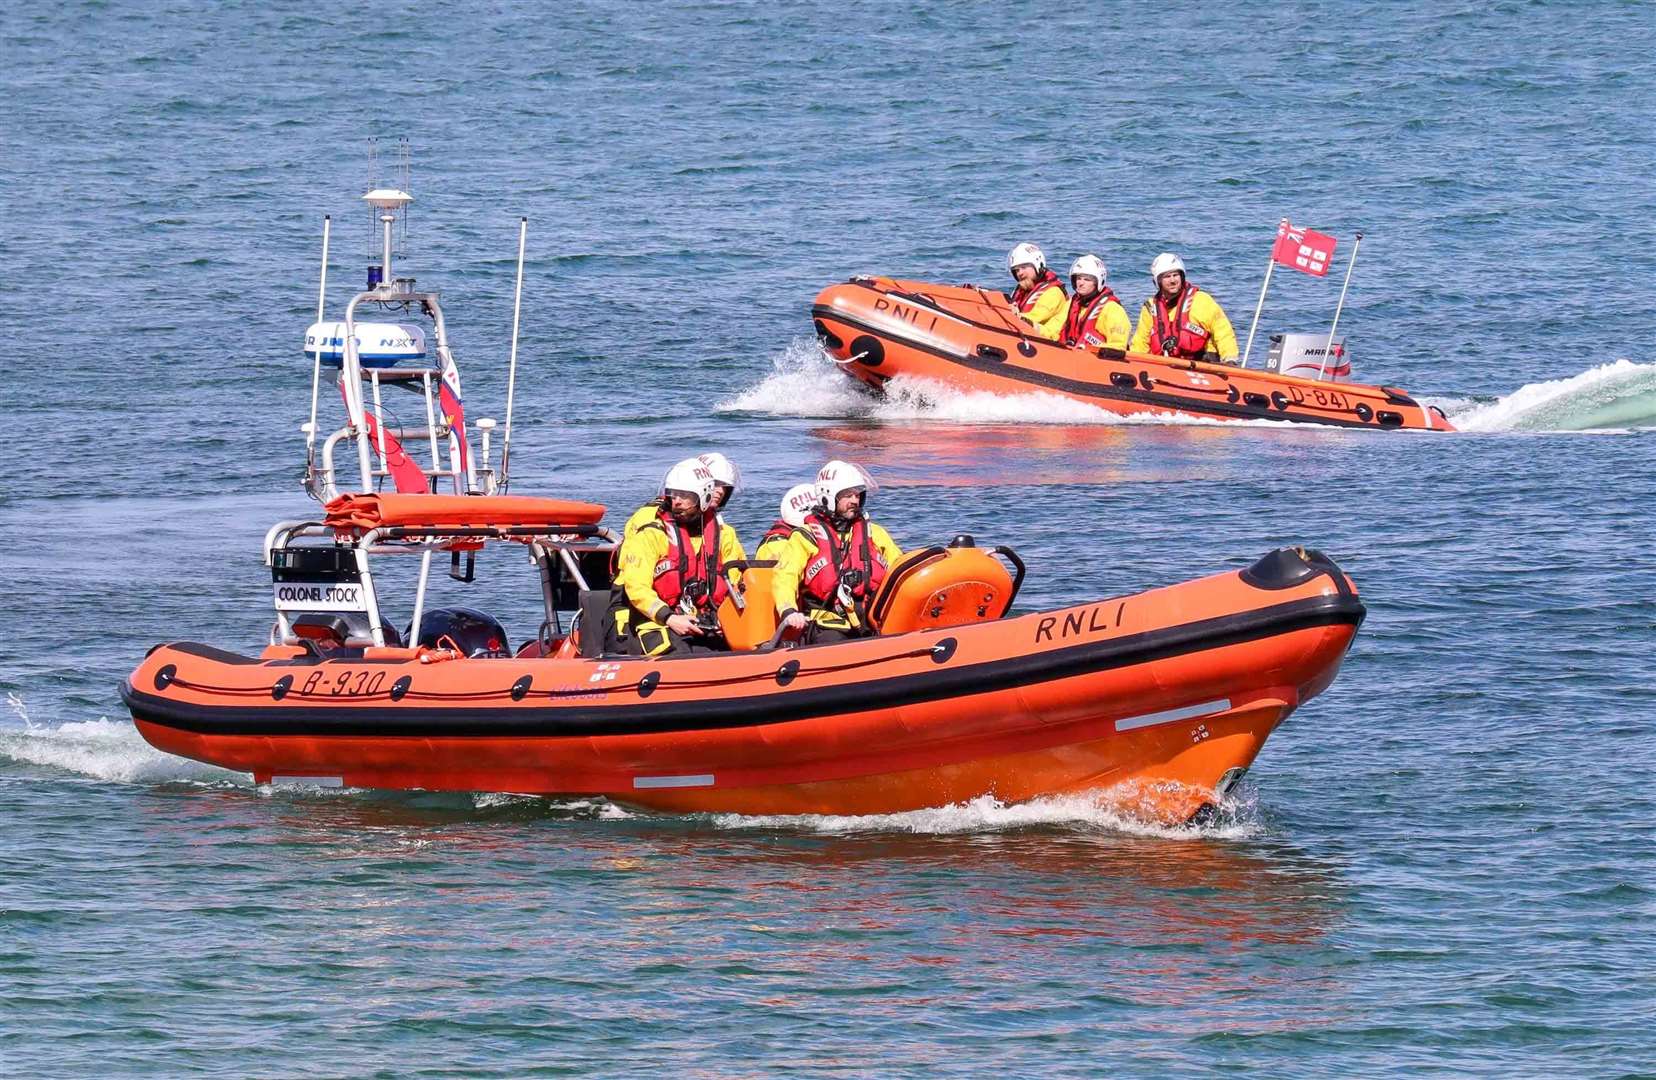 The Margate RNLI B class and D class lifeboats. Picture: RNLI Margate